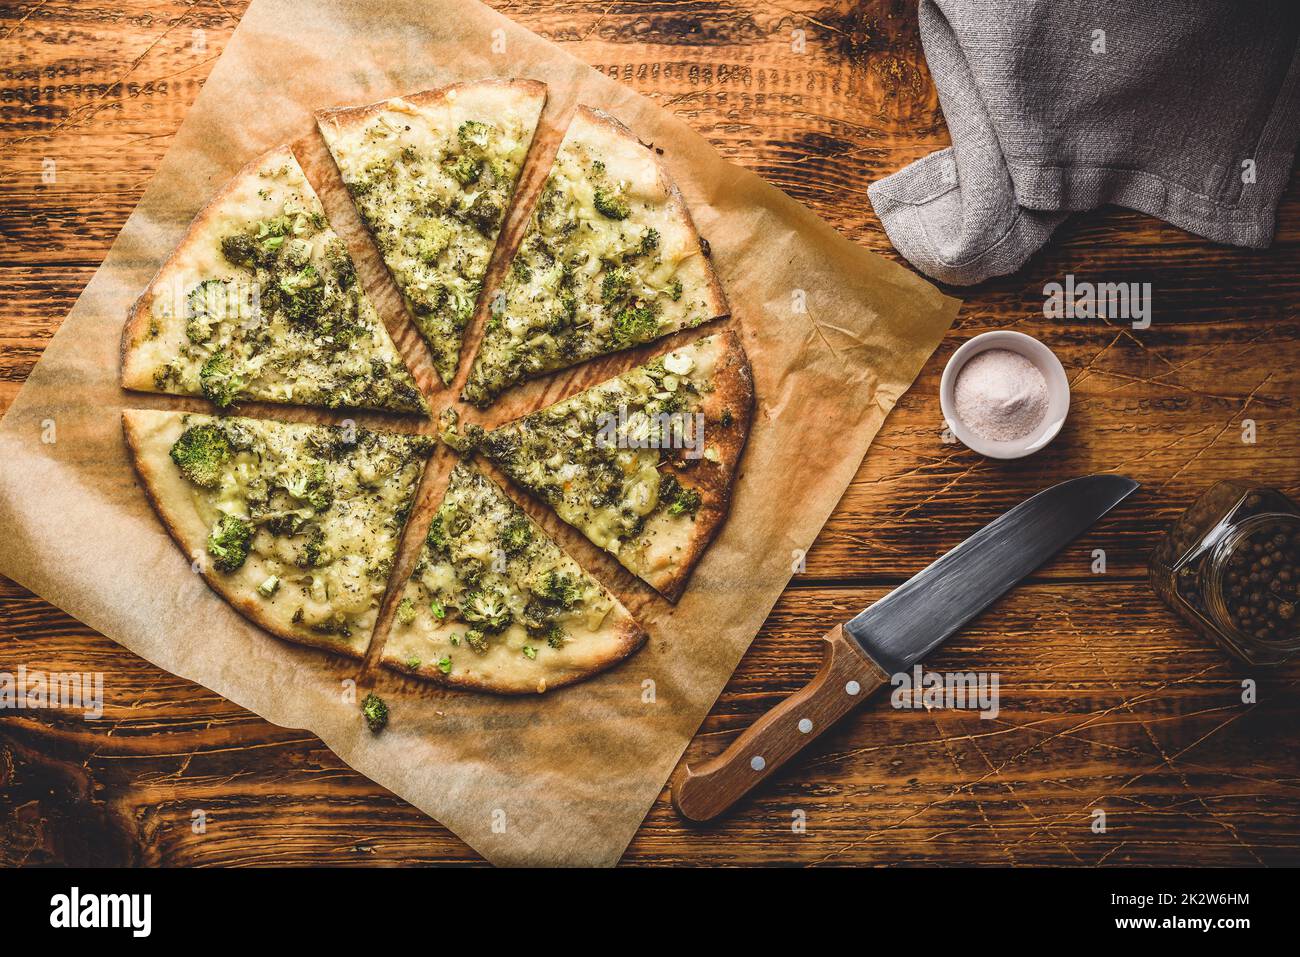 Sliced pizza with broccoli, herbs and parmesan Stock Photo